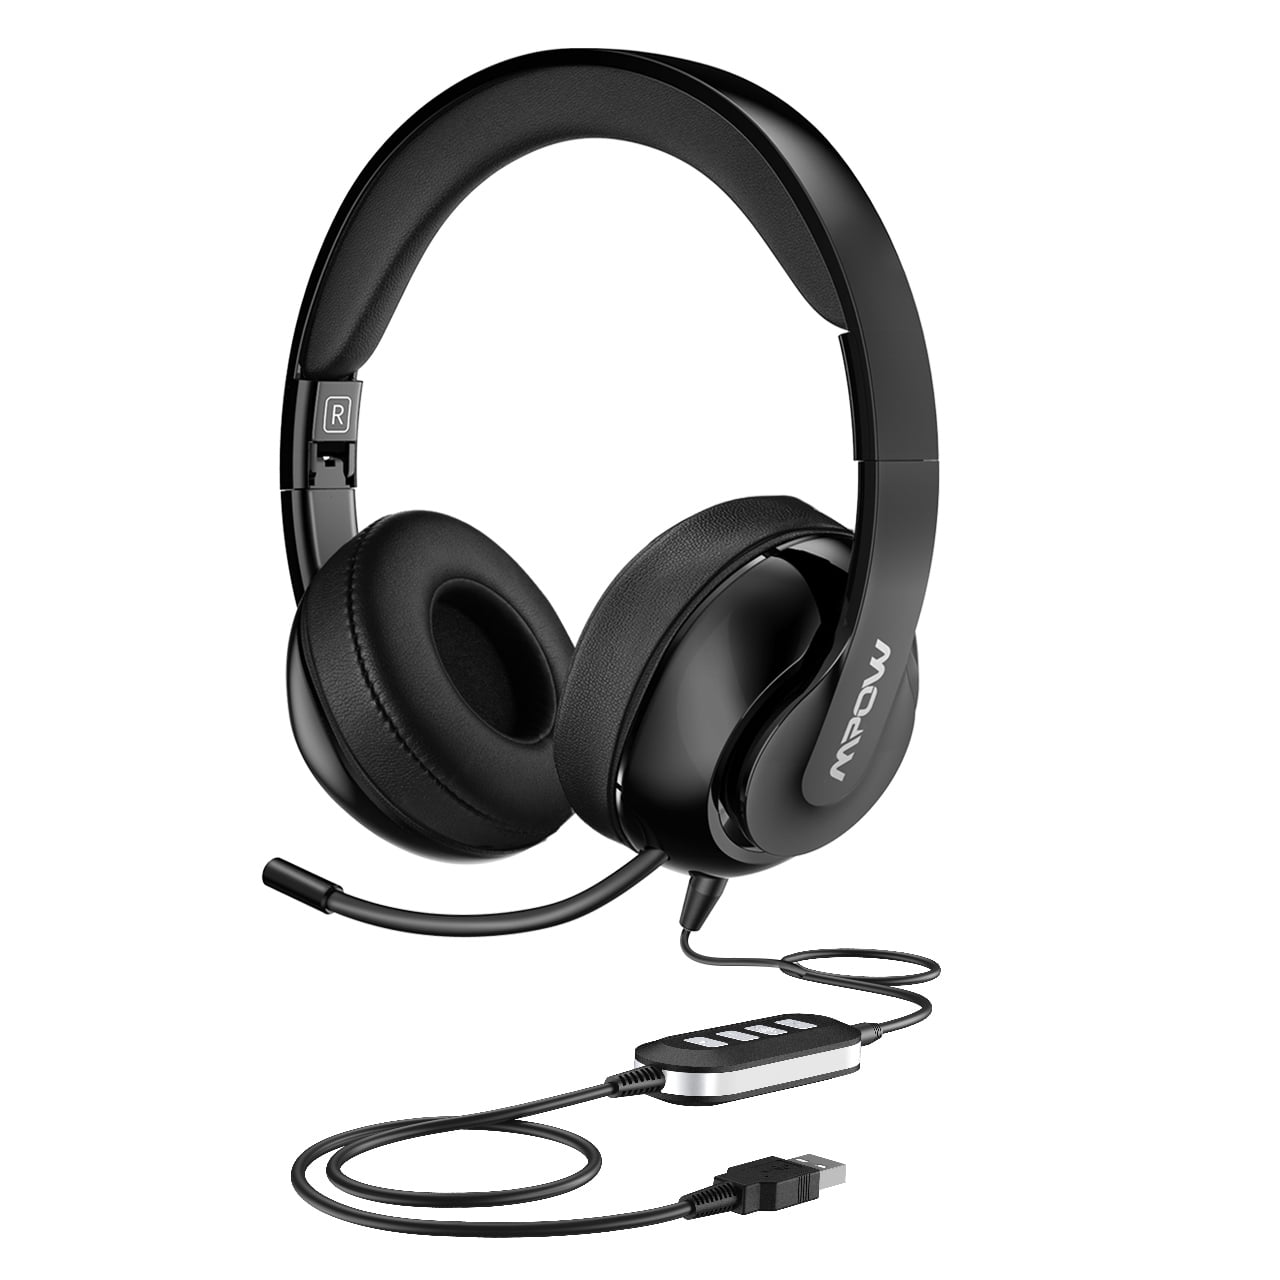 USB Headset with Microphone Noise Cancelling & Audio Controls 